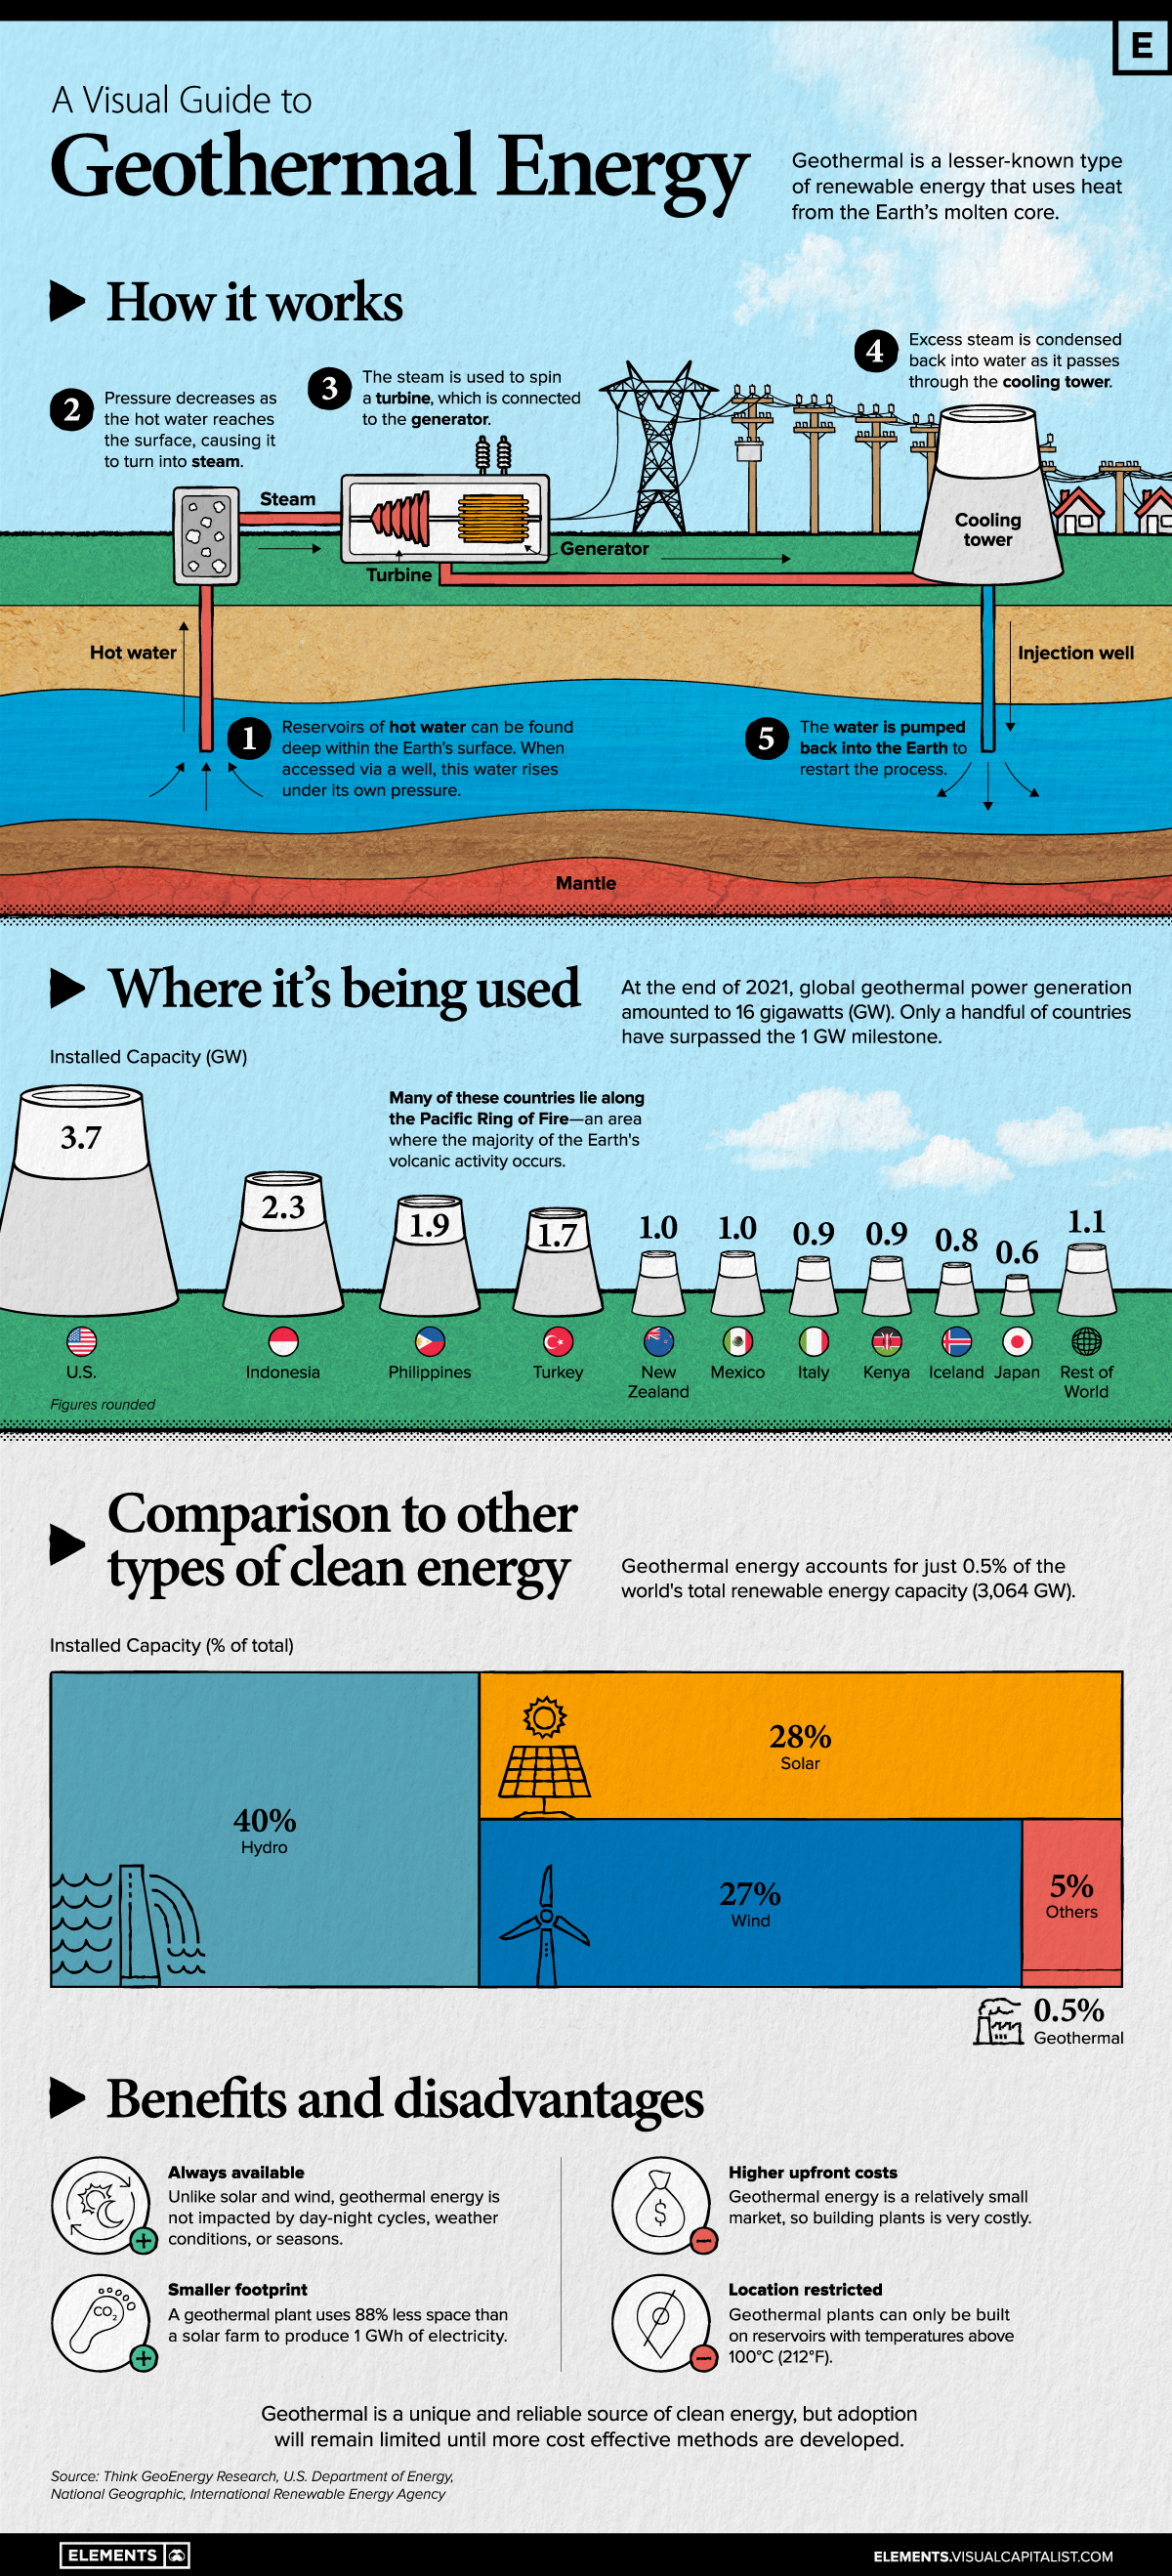 The Visual Capitalist: "A Visual Crash Course on Geothermal Energy"